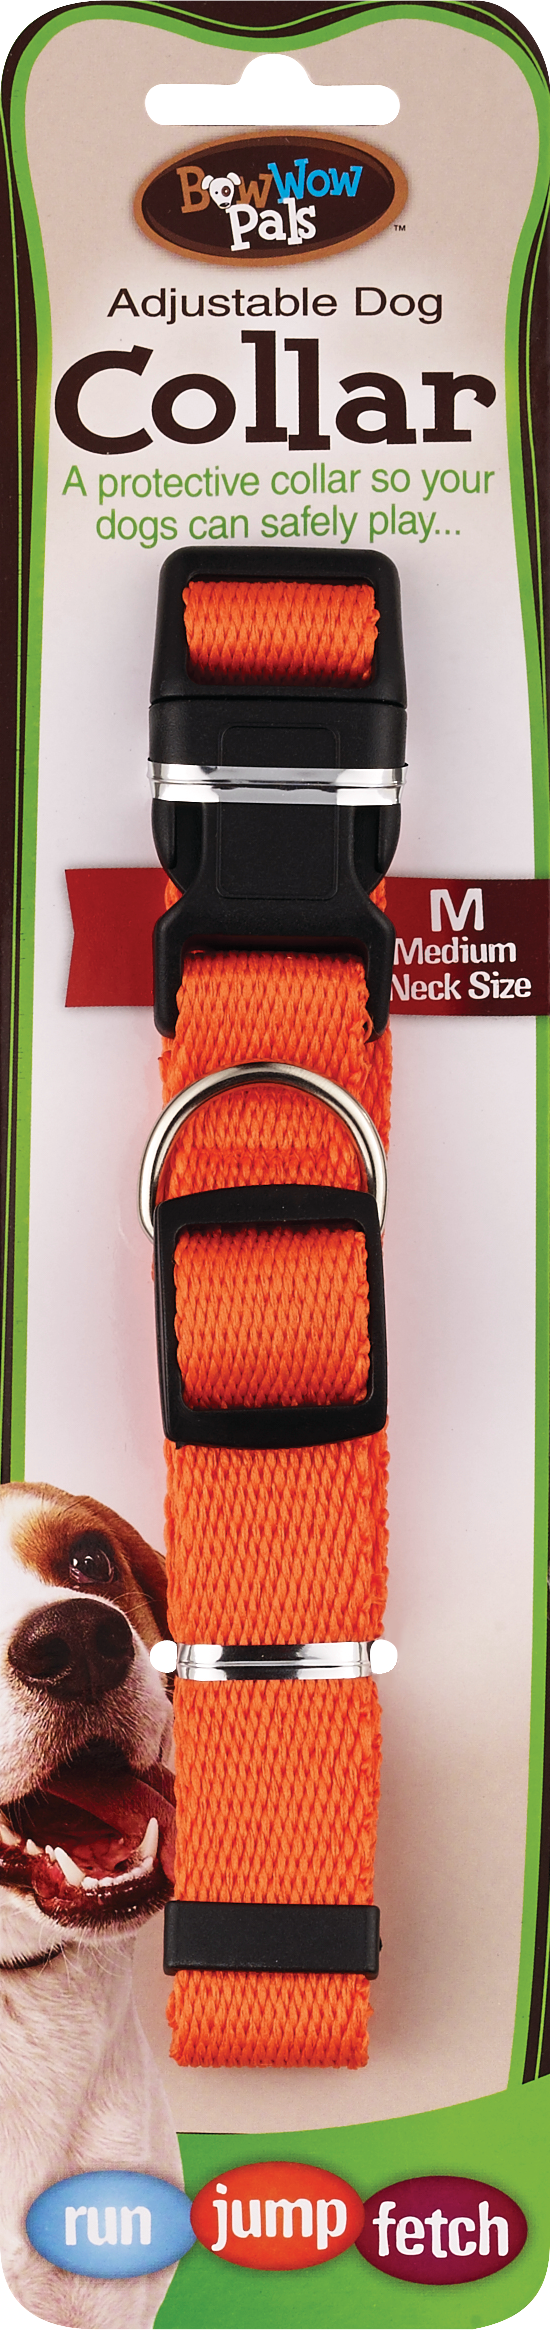 Bow Wow Pals Adjustable Dog Collar, Assorted Colors